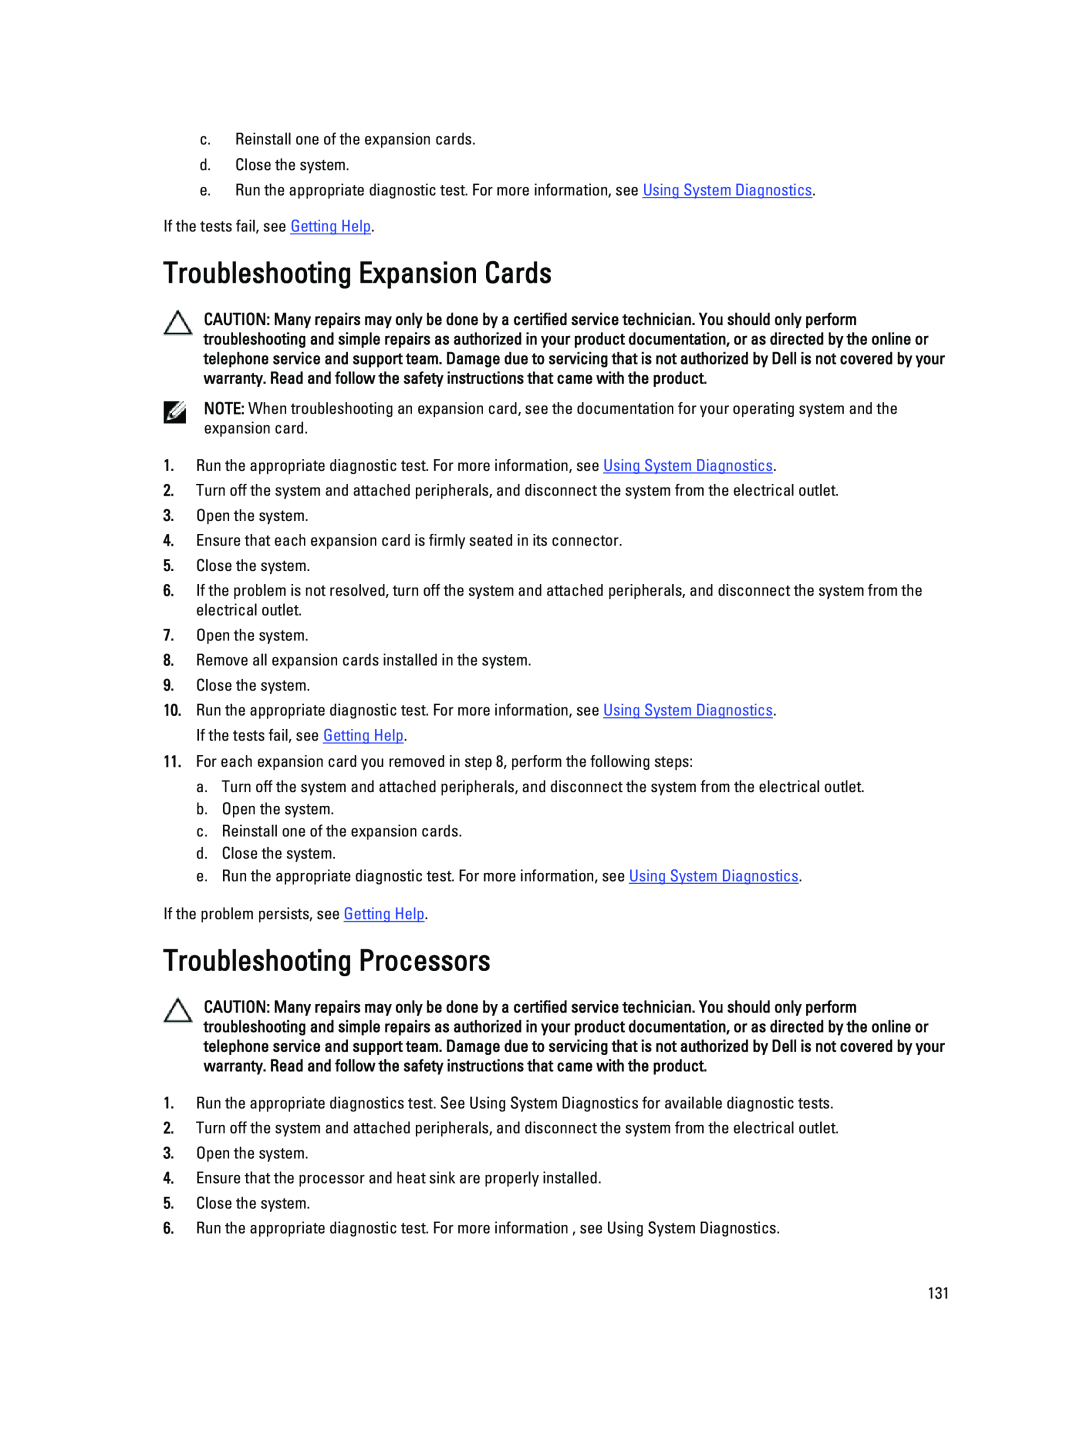 Dell R720XD owner manual Troubleshooting Expansion Cards, Troubleshooting Processors 